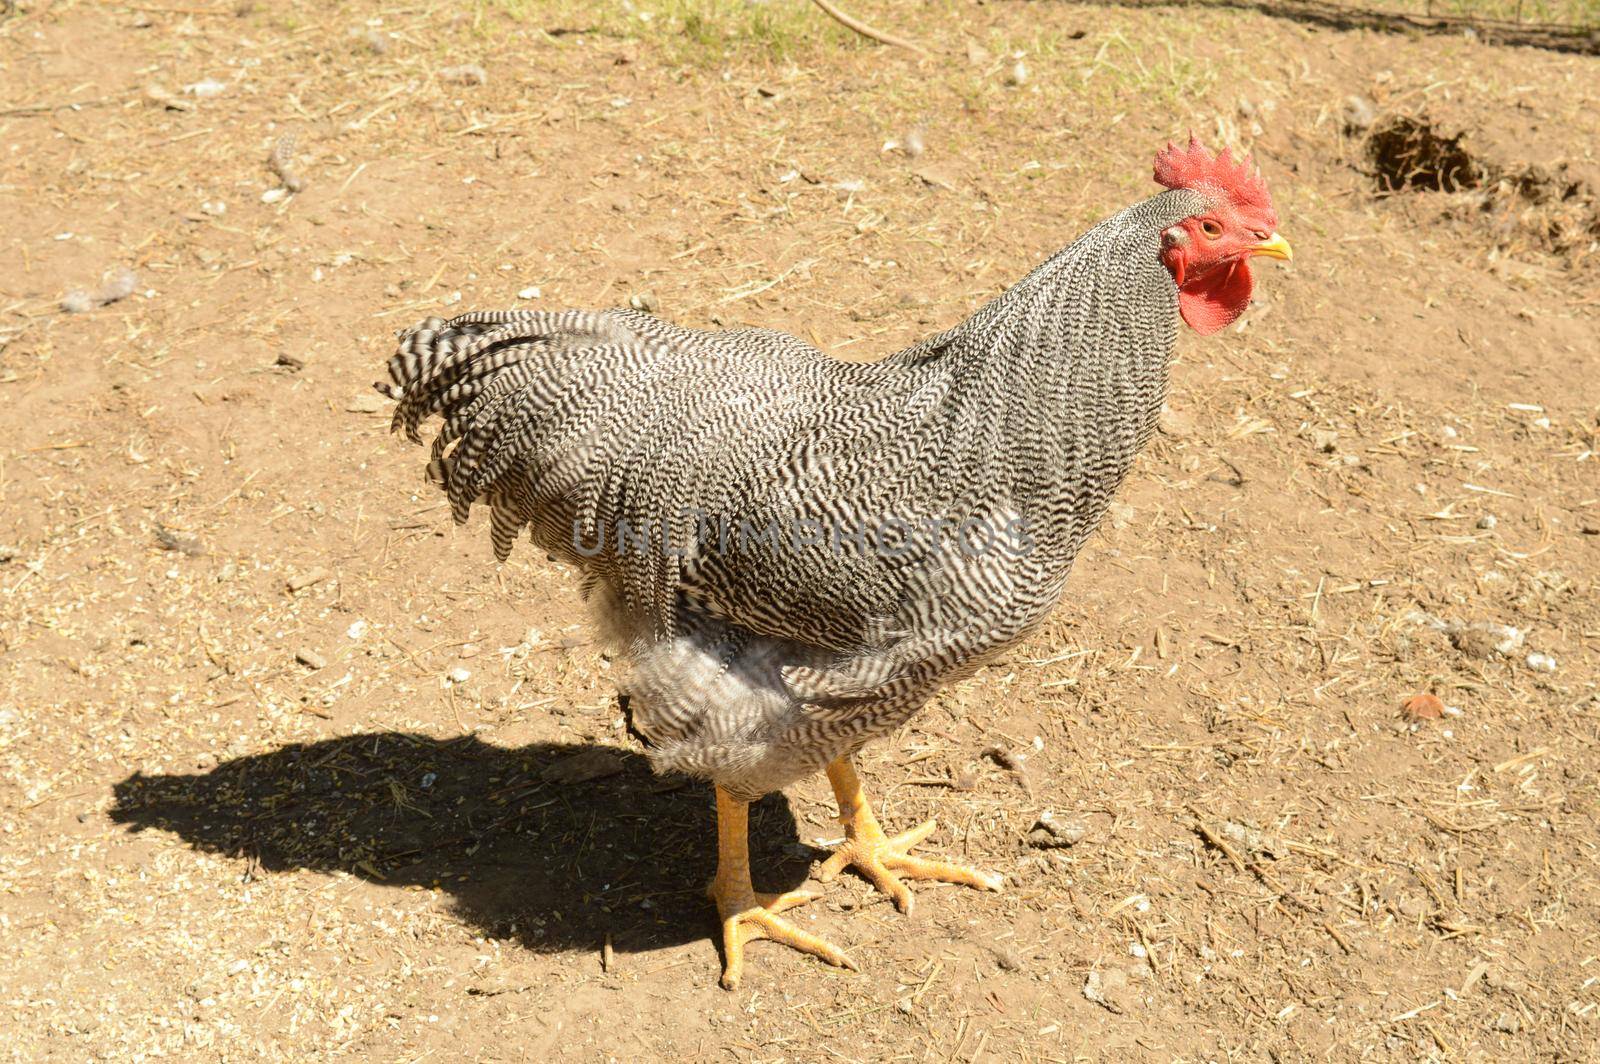 A Plymouth Barred Rock Rooster standing in the yard of his pen during the bright sunshine of the afternoon hours.